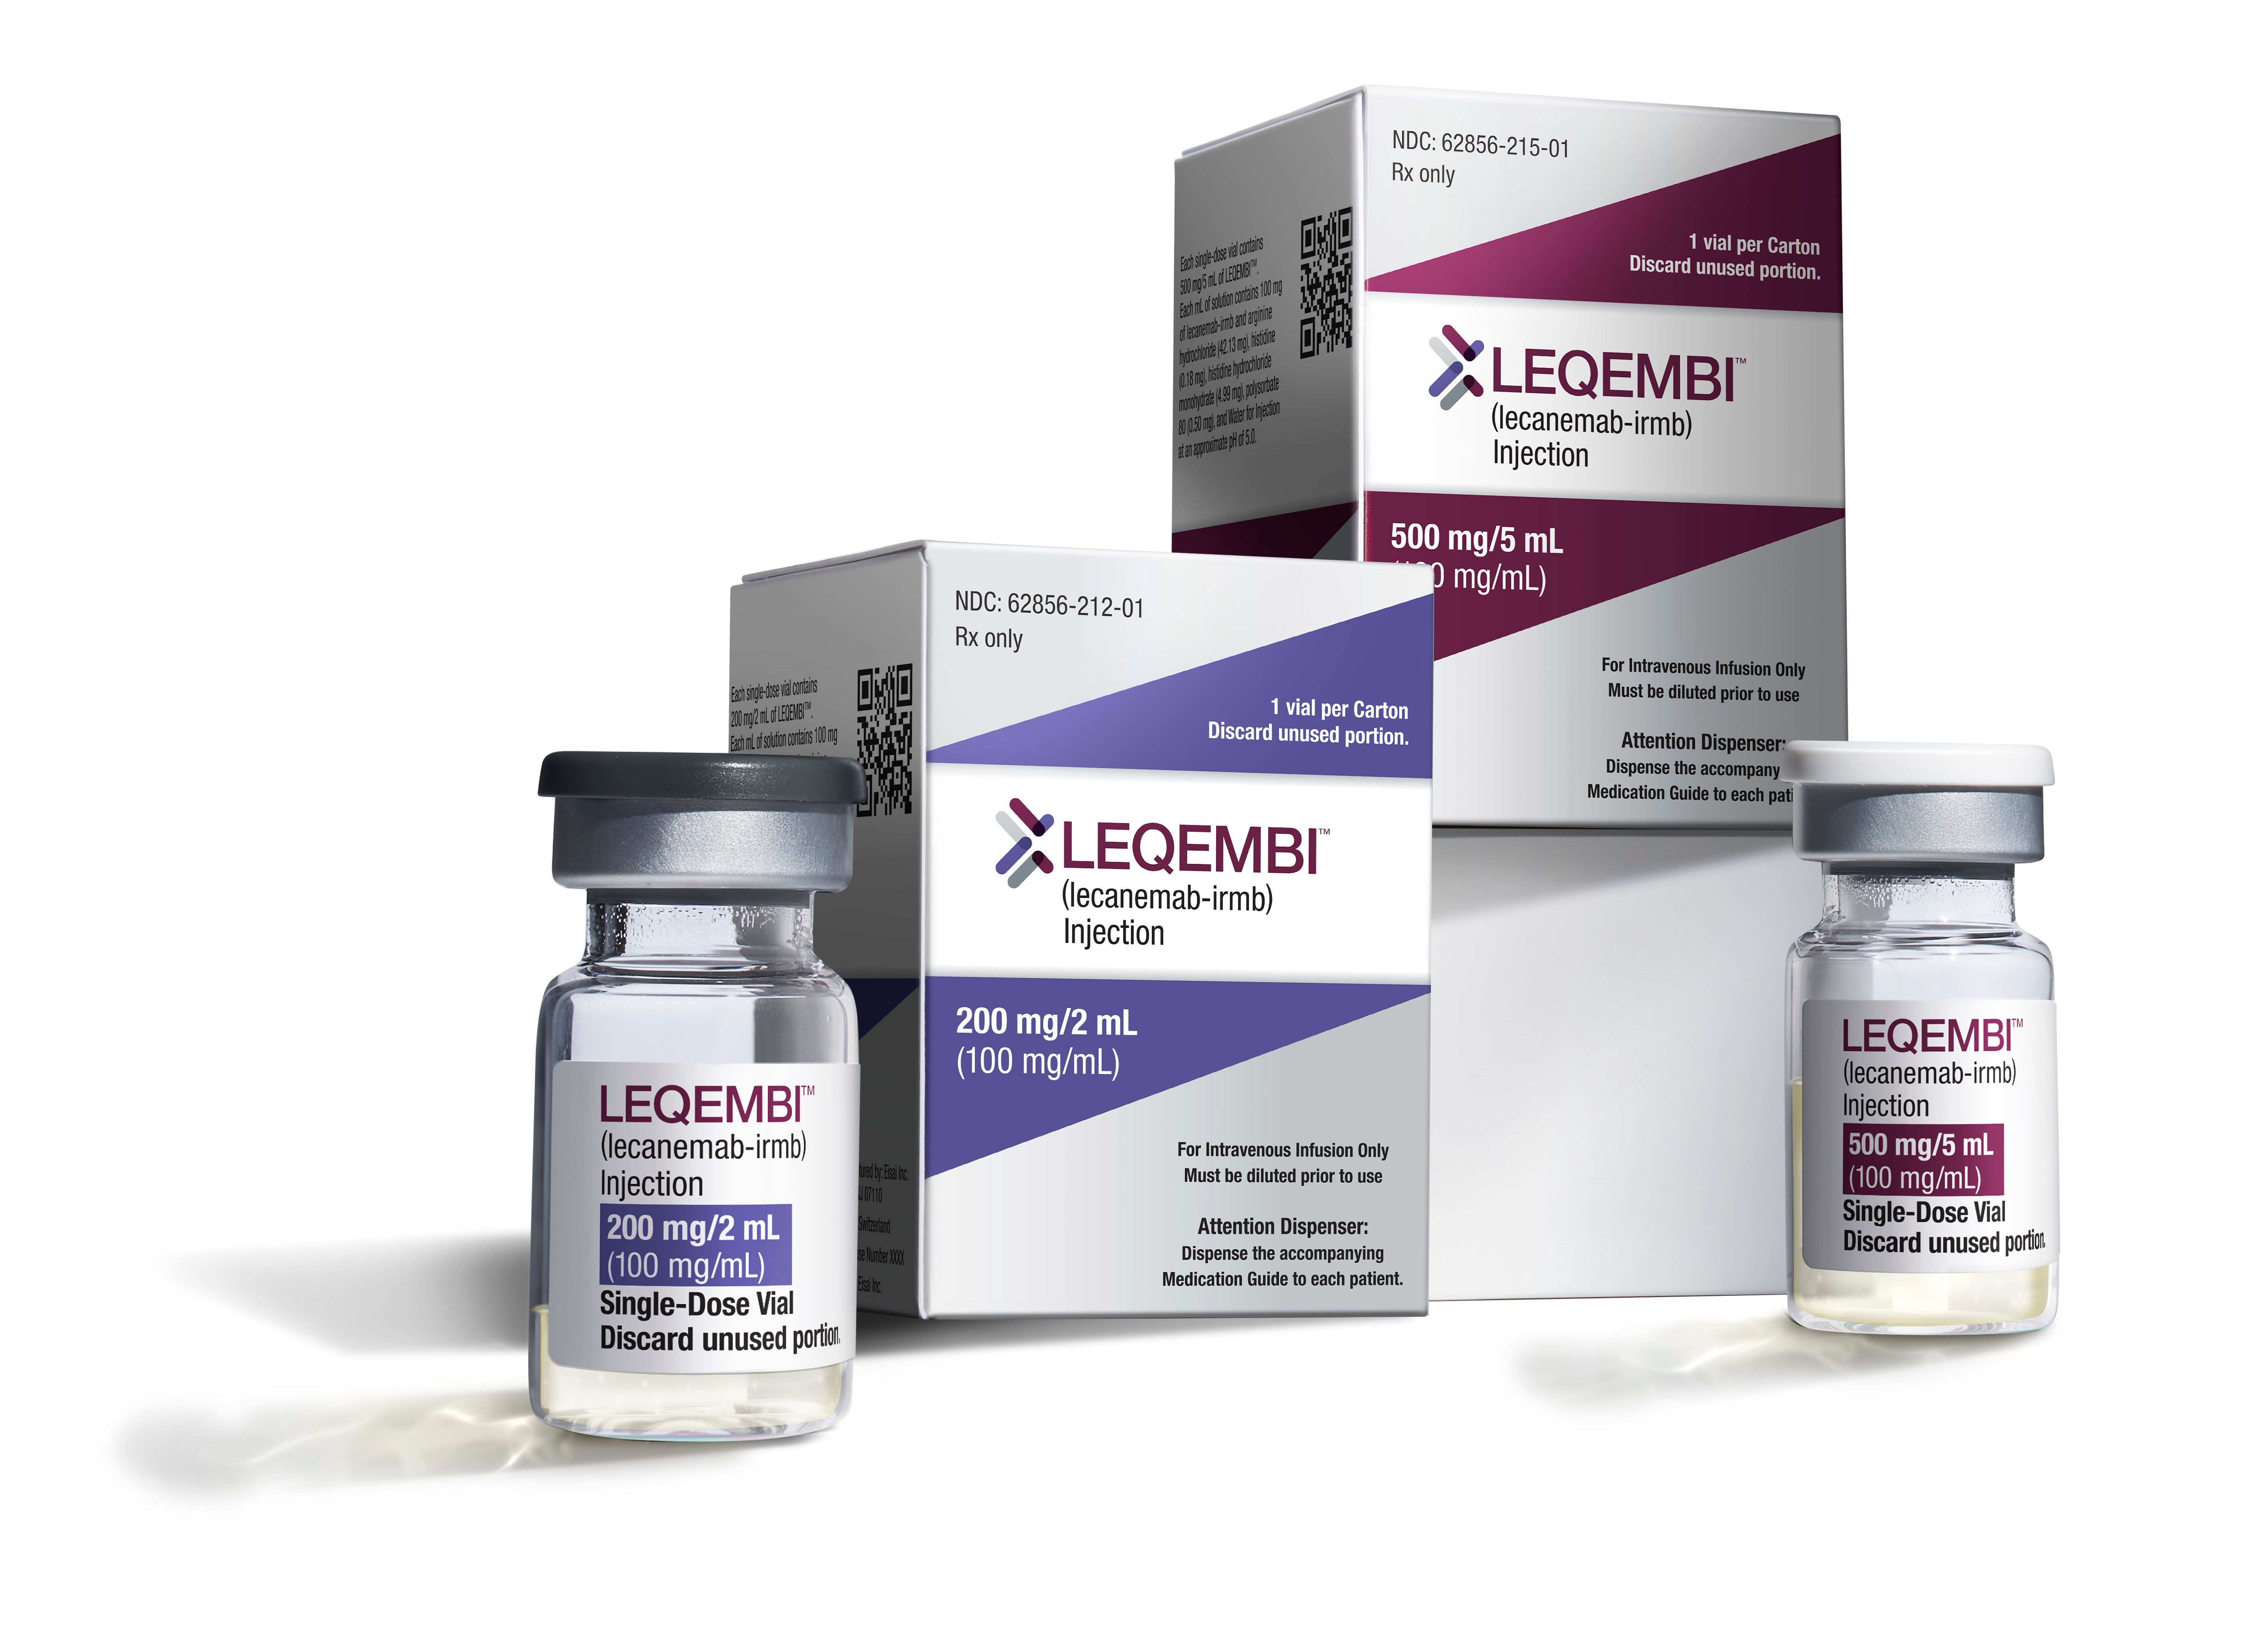 After winning full FDA nod for Leqembi, Eisai touts 'promising' study on subcutaneous version